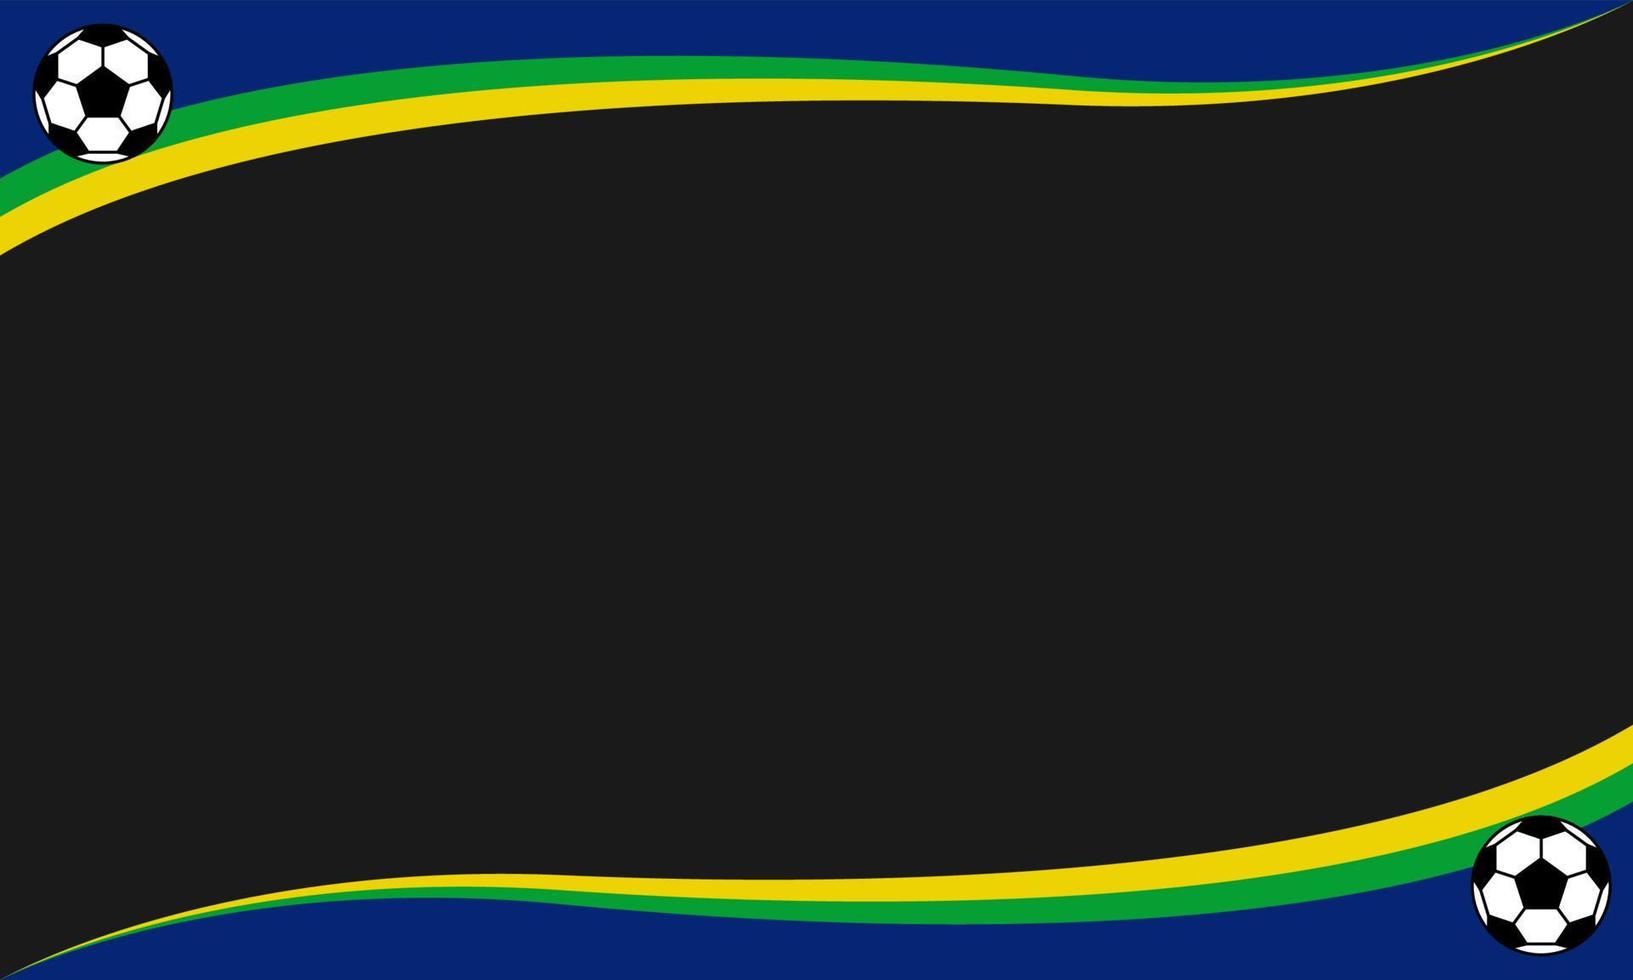 Vector background of Brazil flag. Yellow, blue and green stripes. Suitable for design background. Writing can be added